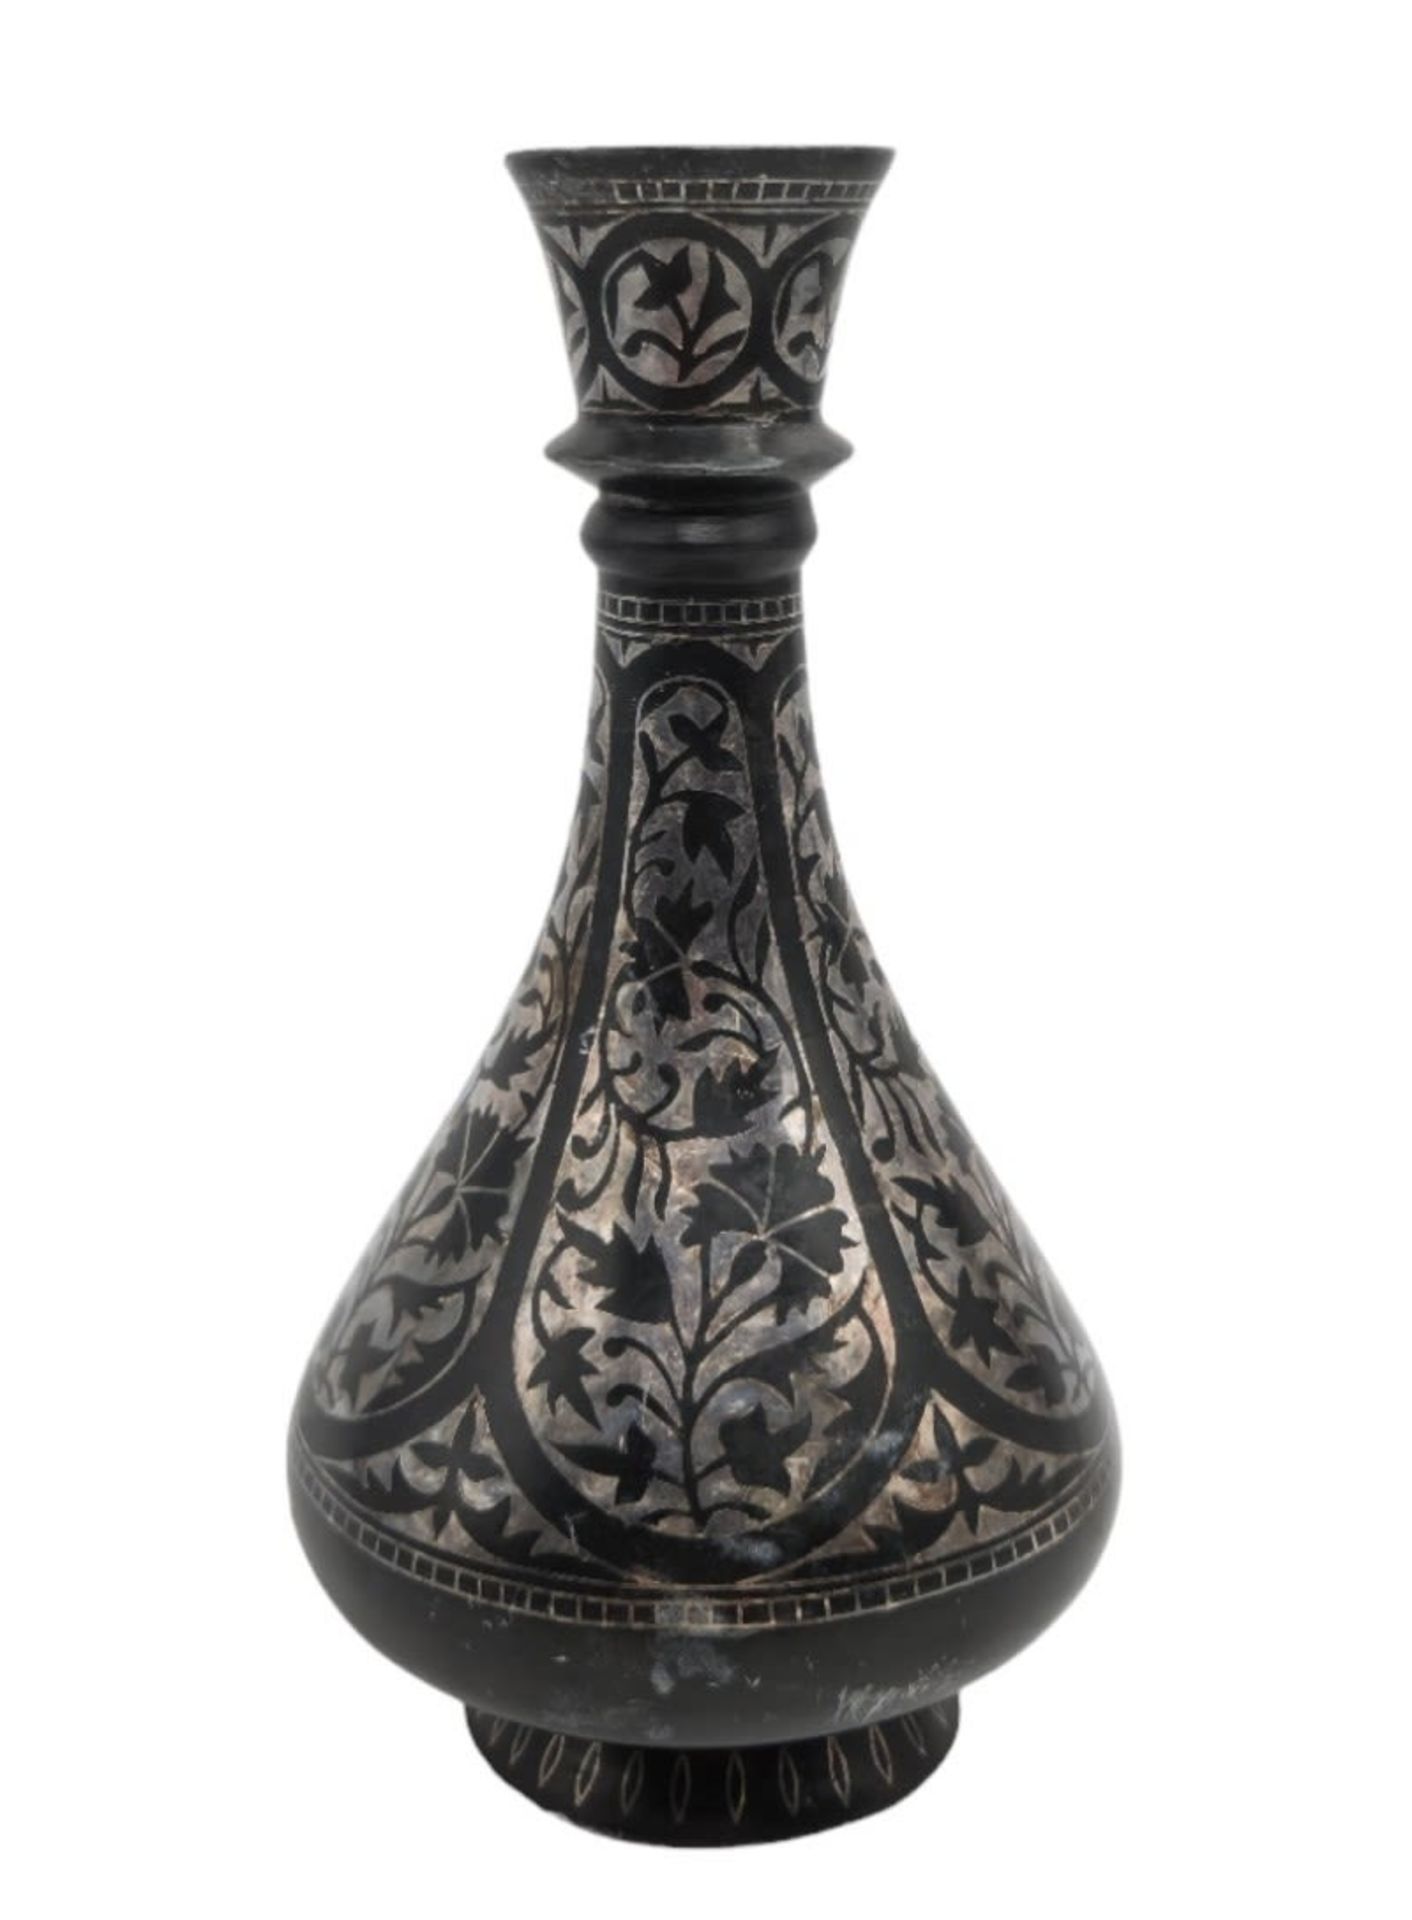 An antique Indian Bidri vase, made of metal inlaid with silver, second half of the 19th century, - Bild 3 aus 5